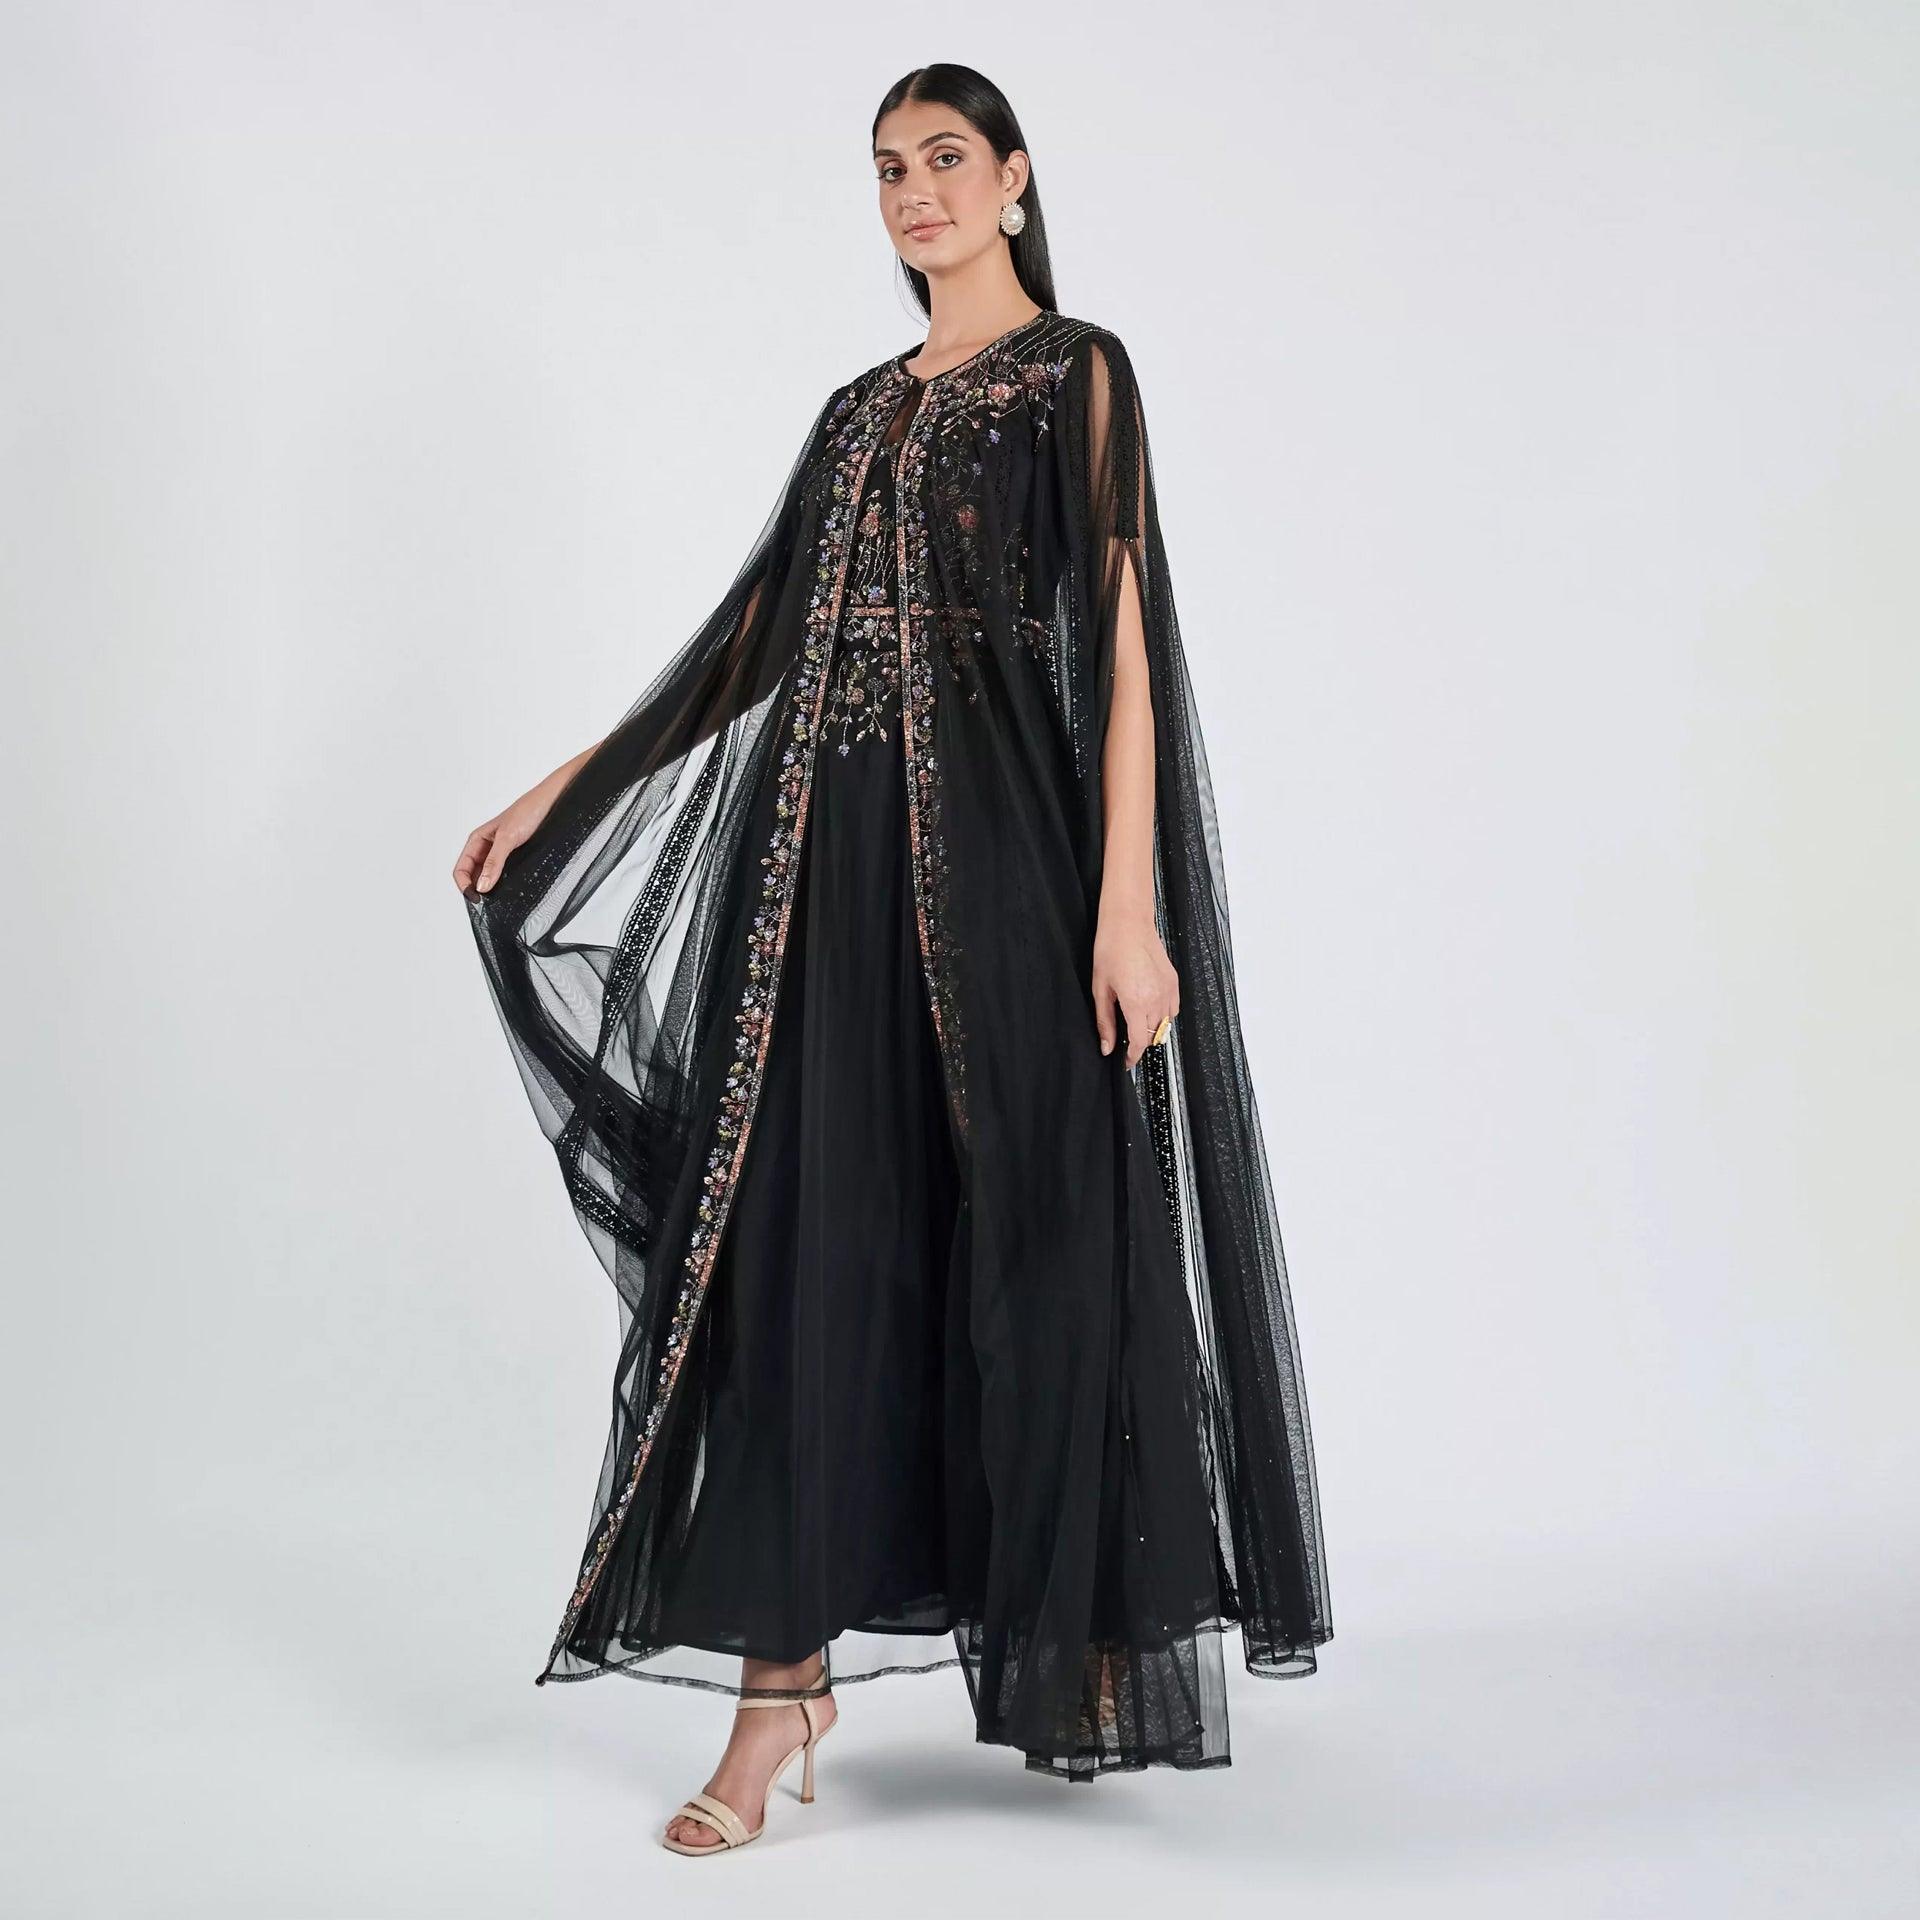 Black Embroidery Sleeveless Dress with Chiffon Cape From Shalky - WECRE8